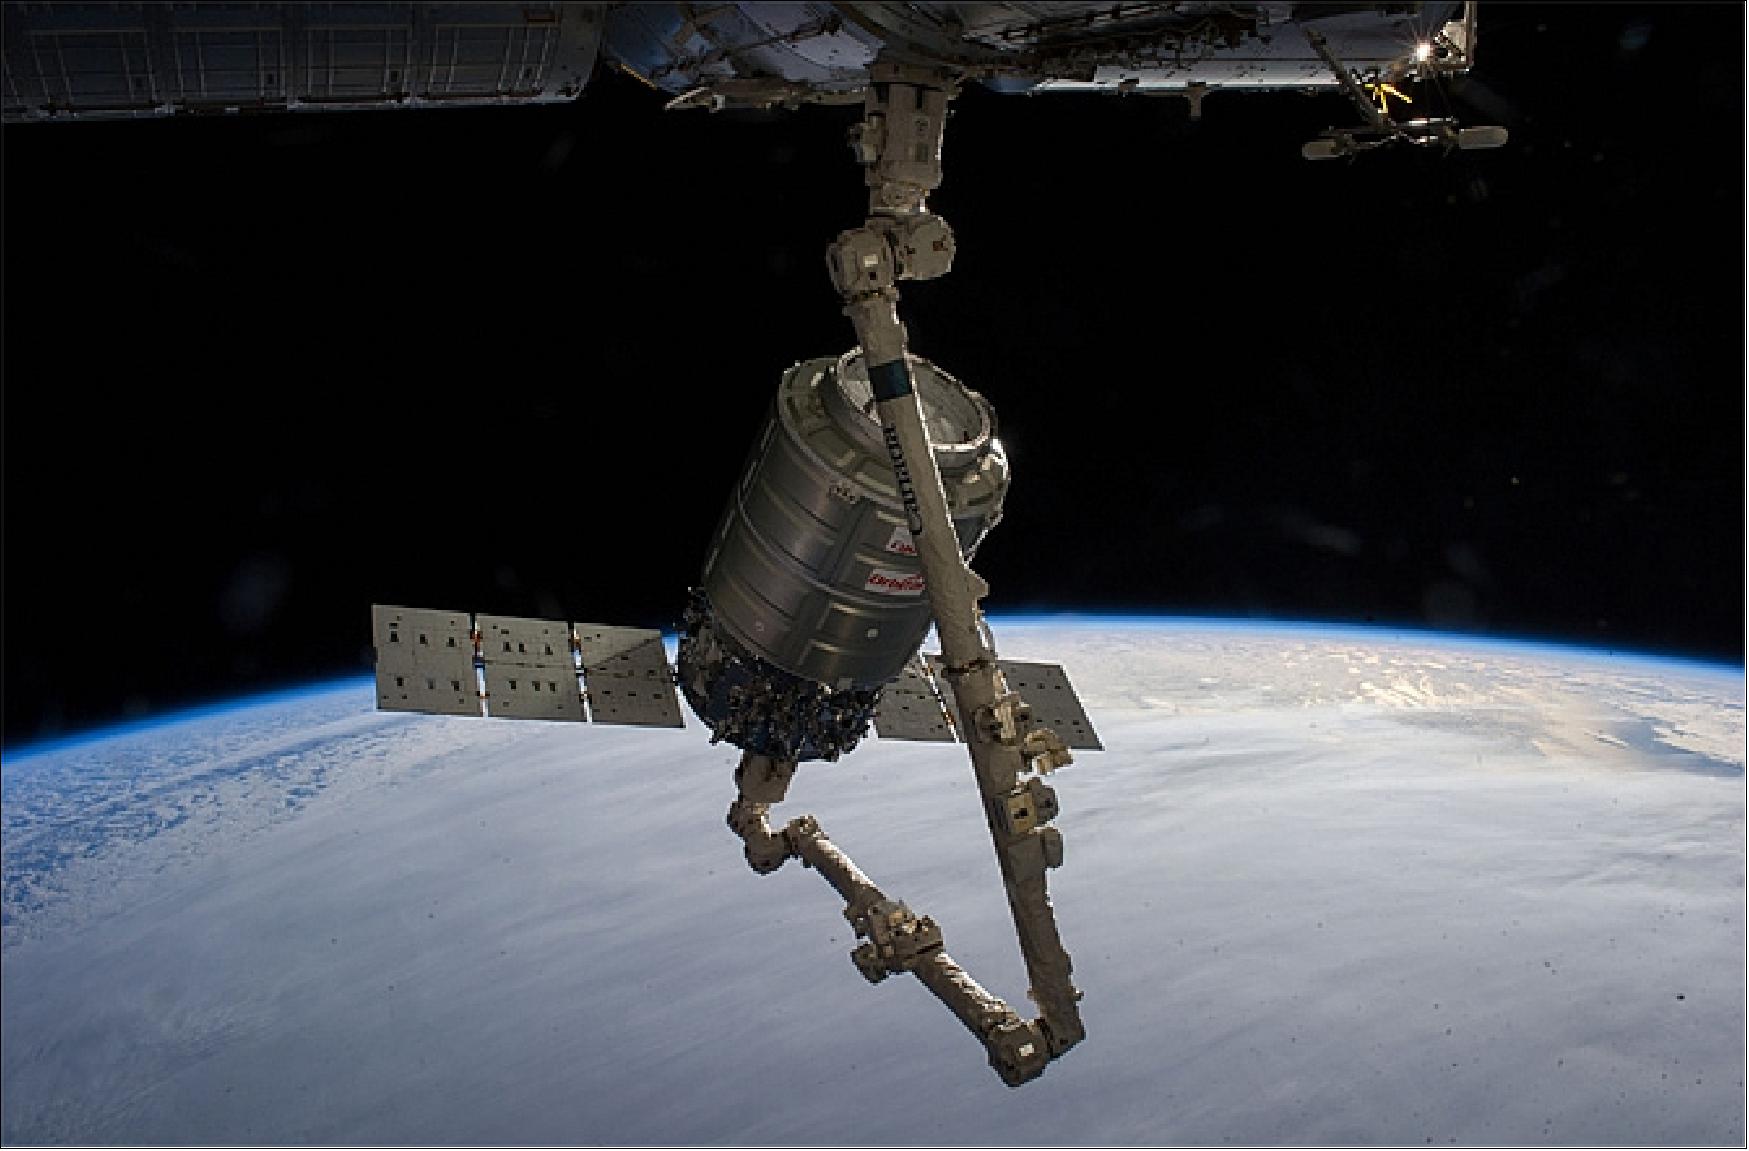 Figure 18: Image of Cygnus grappling with Canadarm2 and berthing to the ISS (image credit: NASA)